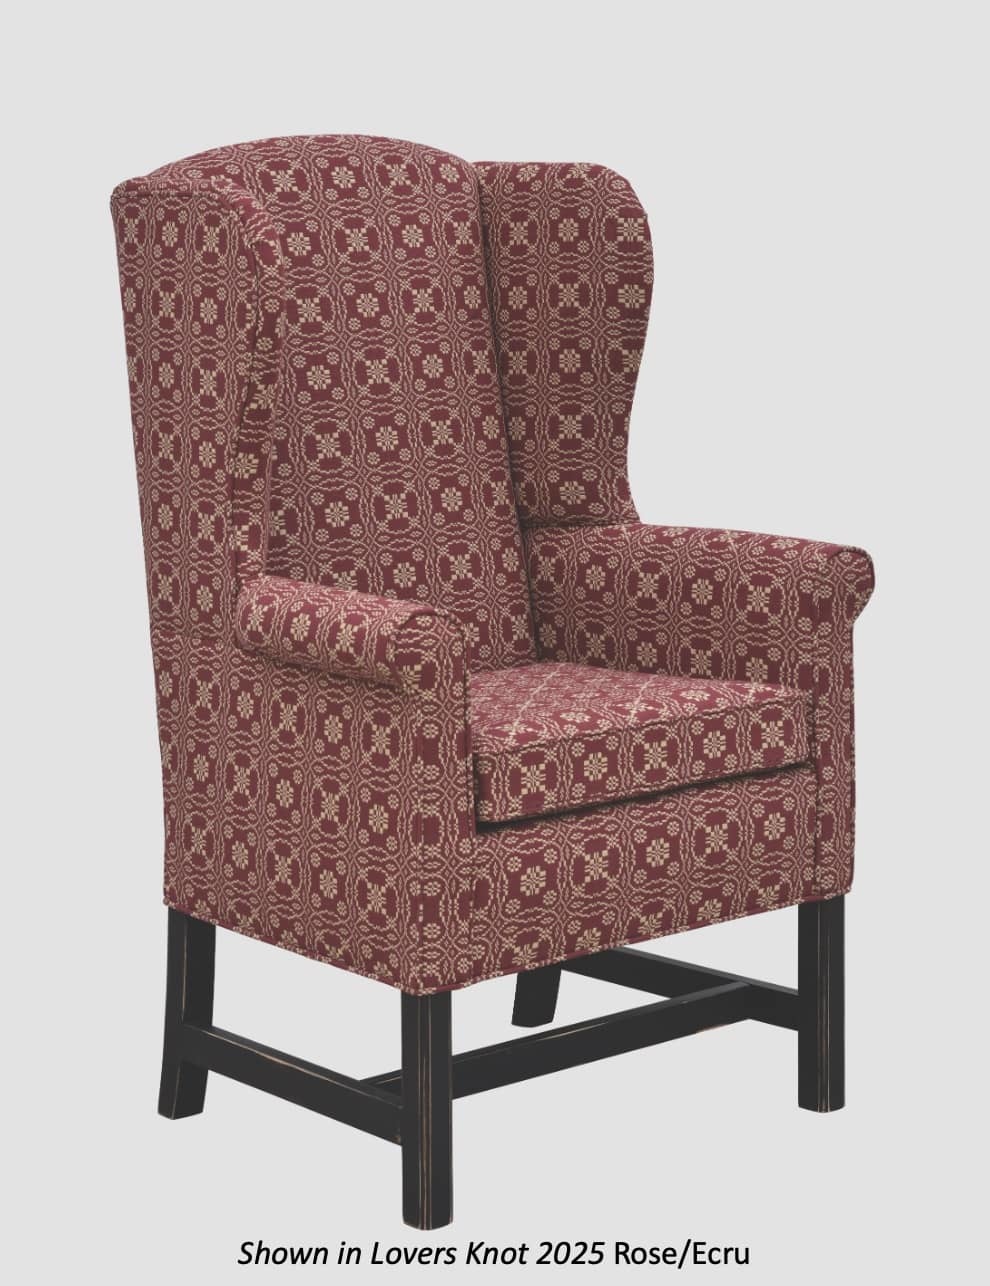 Town & Country Furnishings Library Wing Chair from the American Primitive Collection